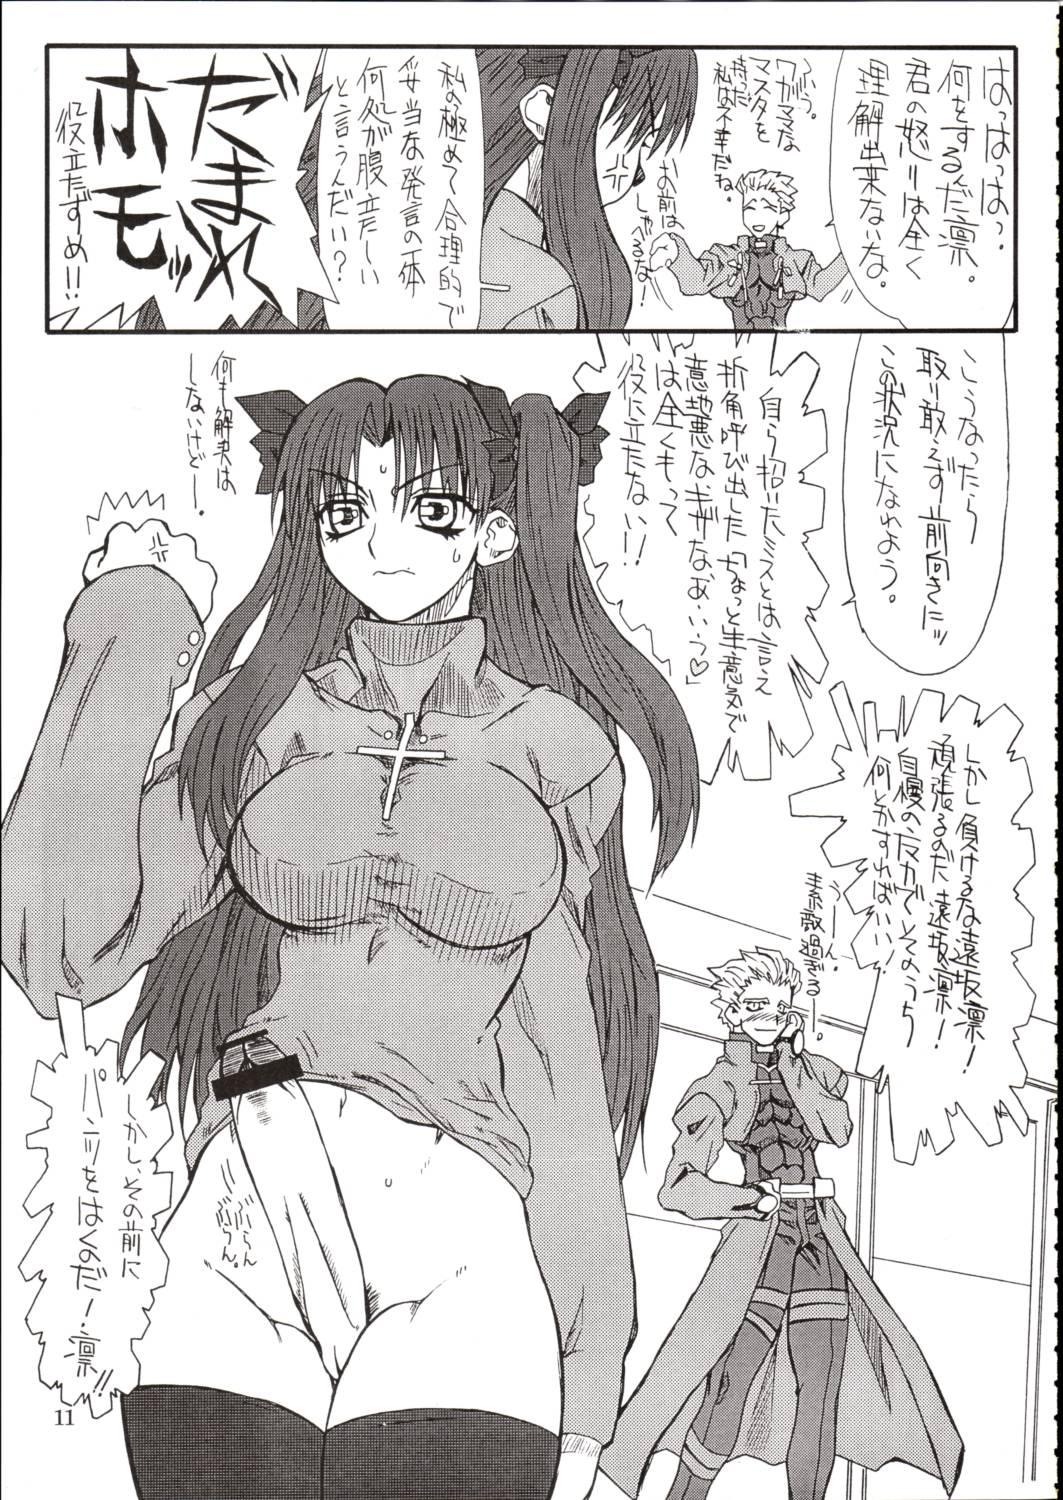 Mexico Azuki Been - Fate stay night Great Fuck - Page 10